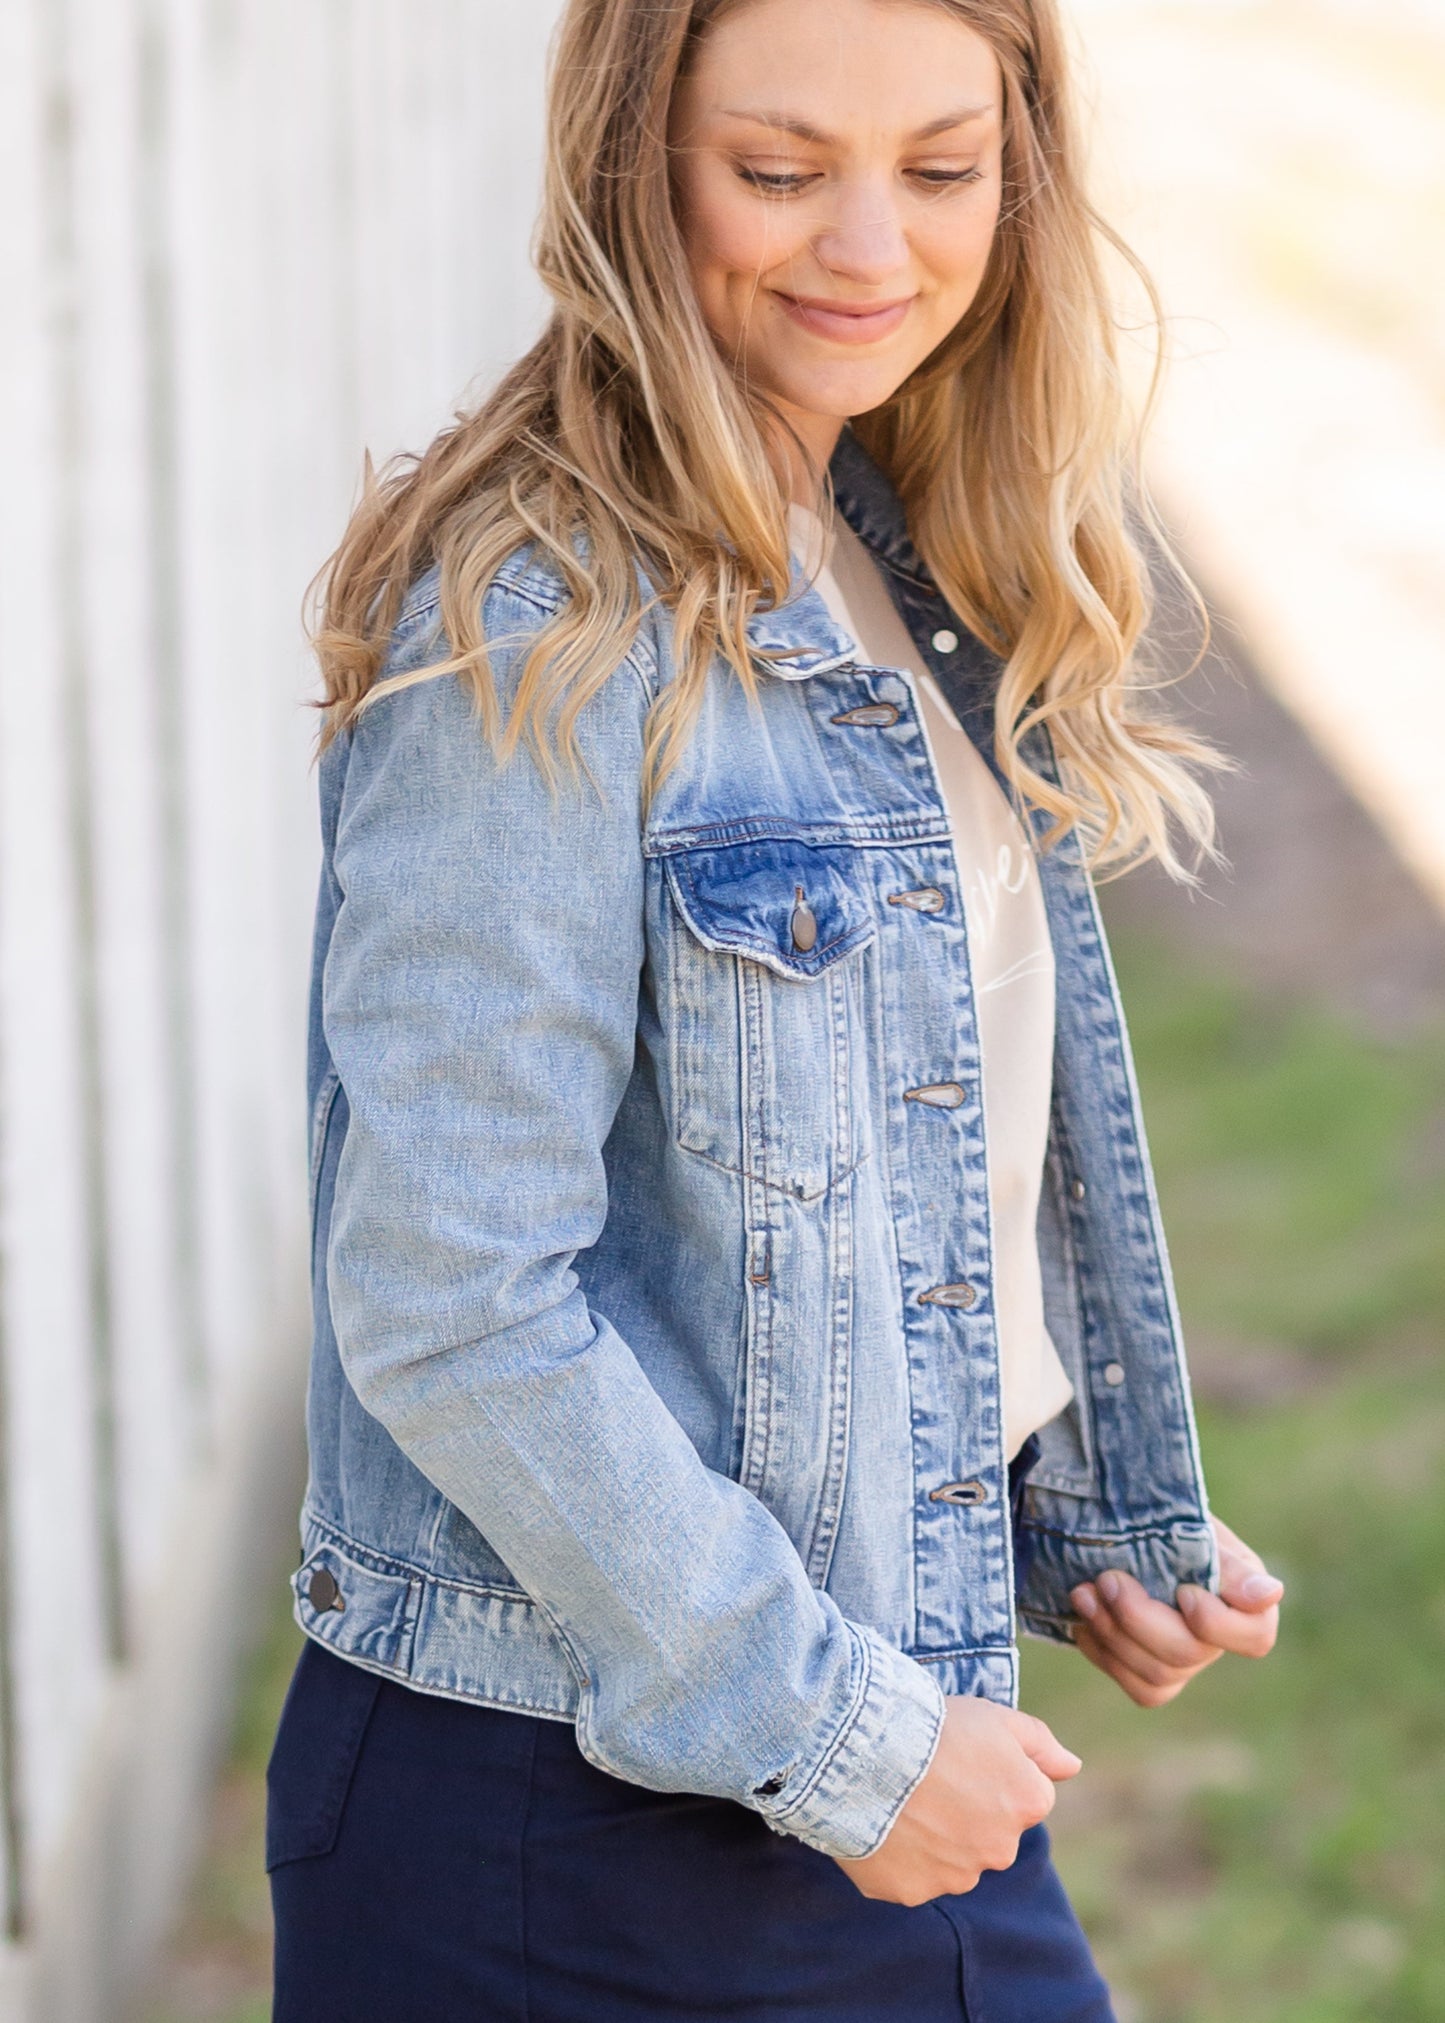 Fashionable, classic, soft and comfortable - no wardrobe essential is more of a style hero than this casual Light Wash Denim Jean Jacket. Pair this jacket with any bottoms, a basic tee, or cute blouse for a style that suits all. Made from soft 100% cotton fabric this denim jacket is designed to comfort all-day.